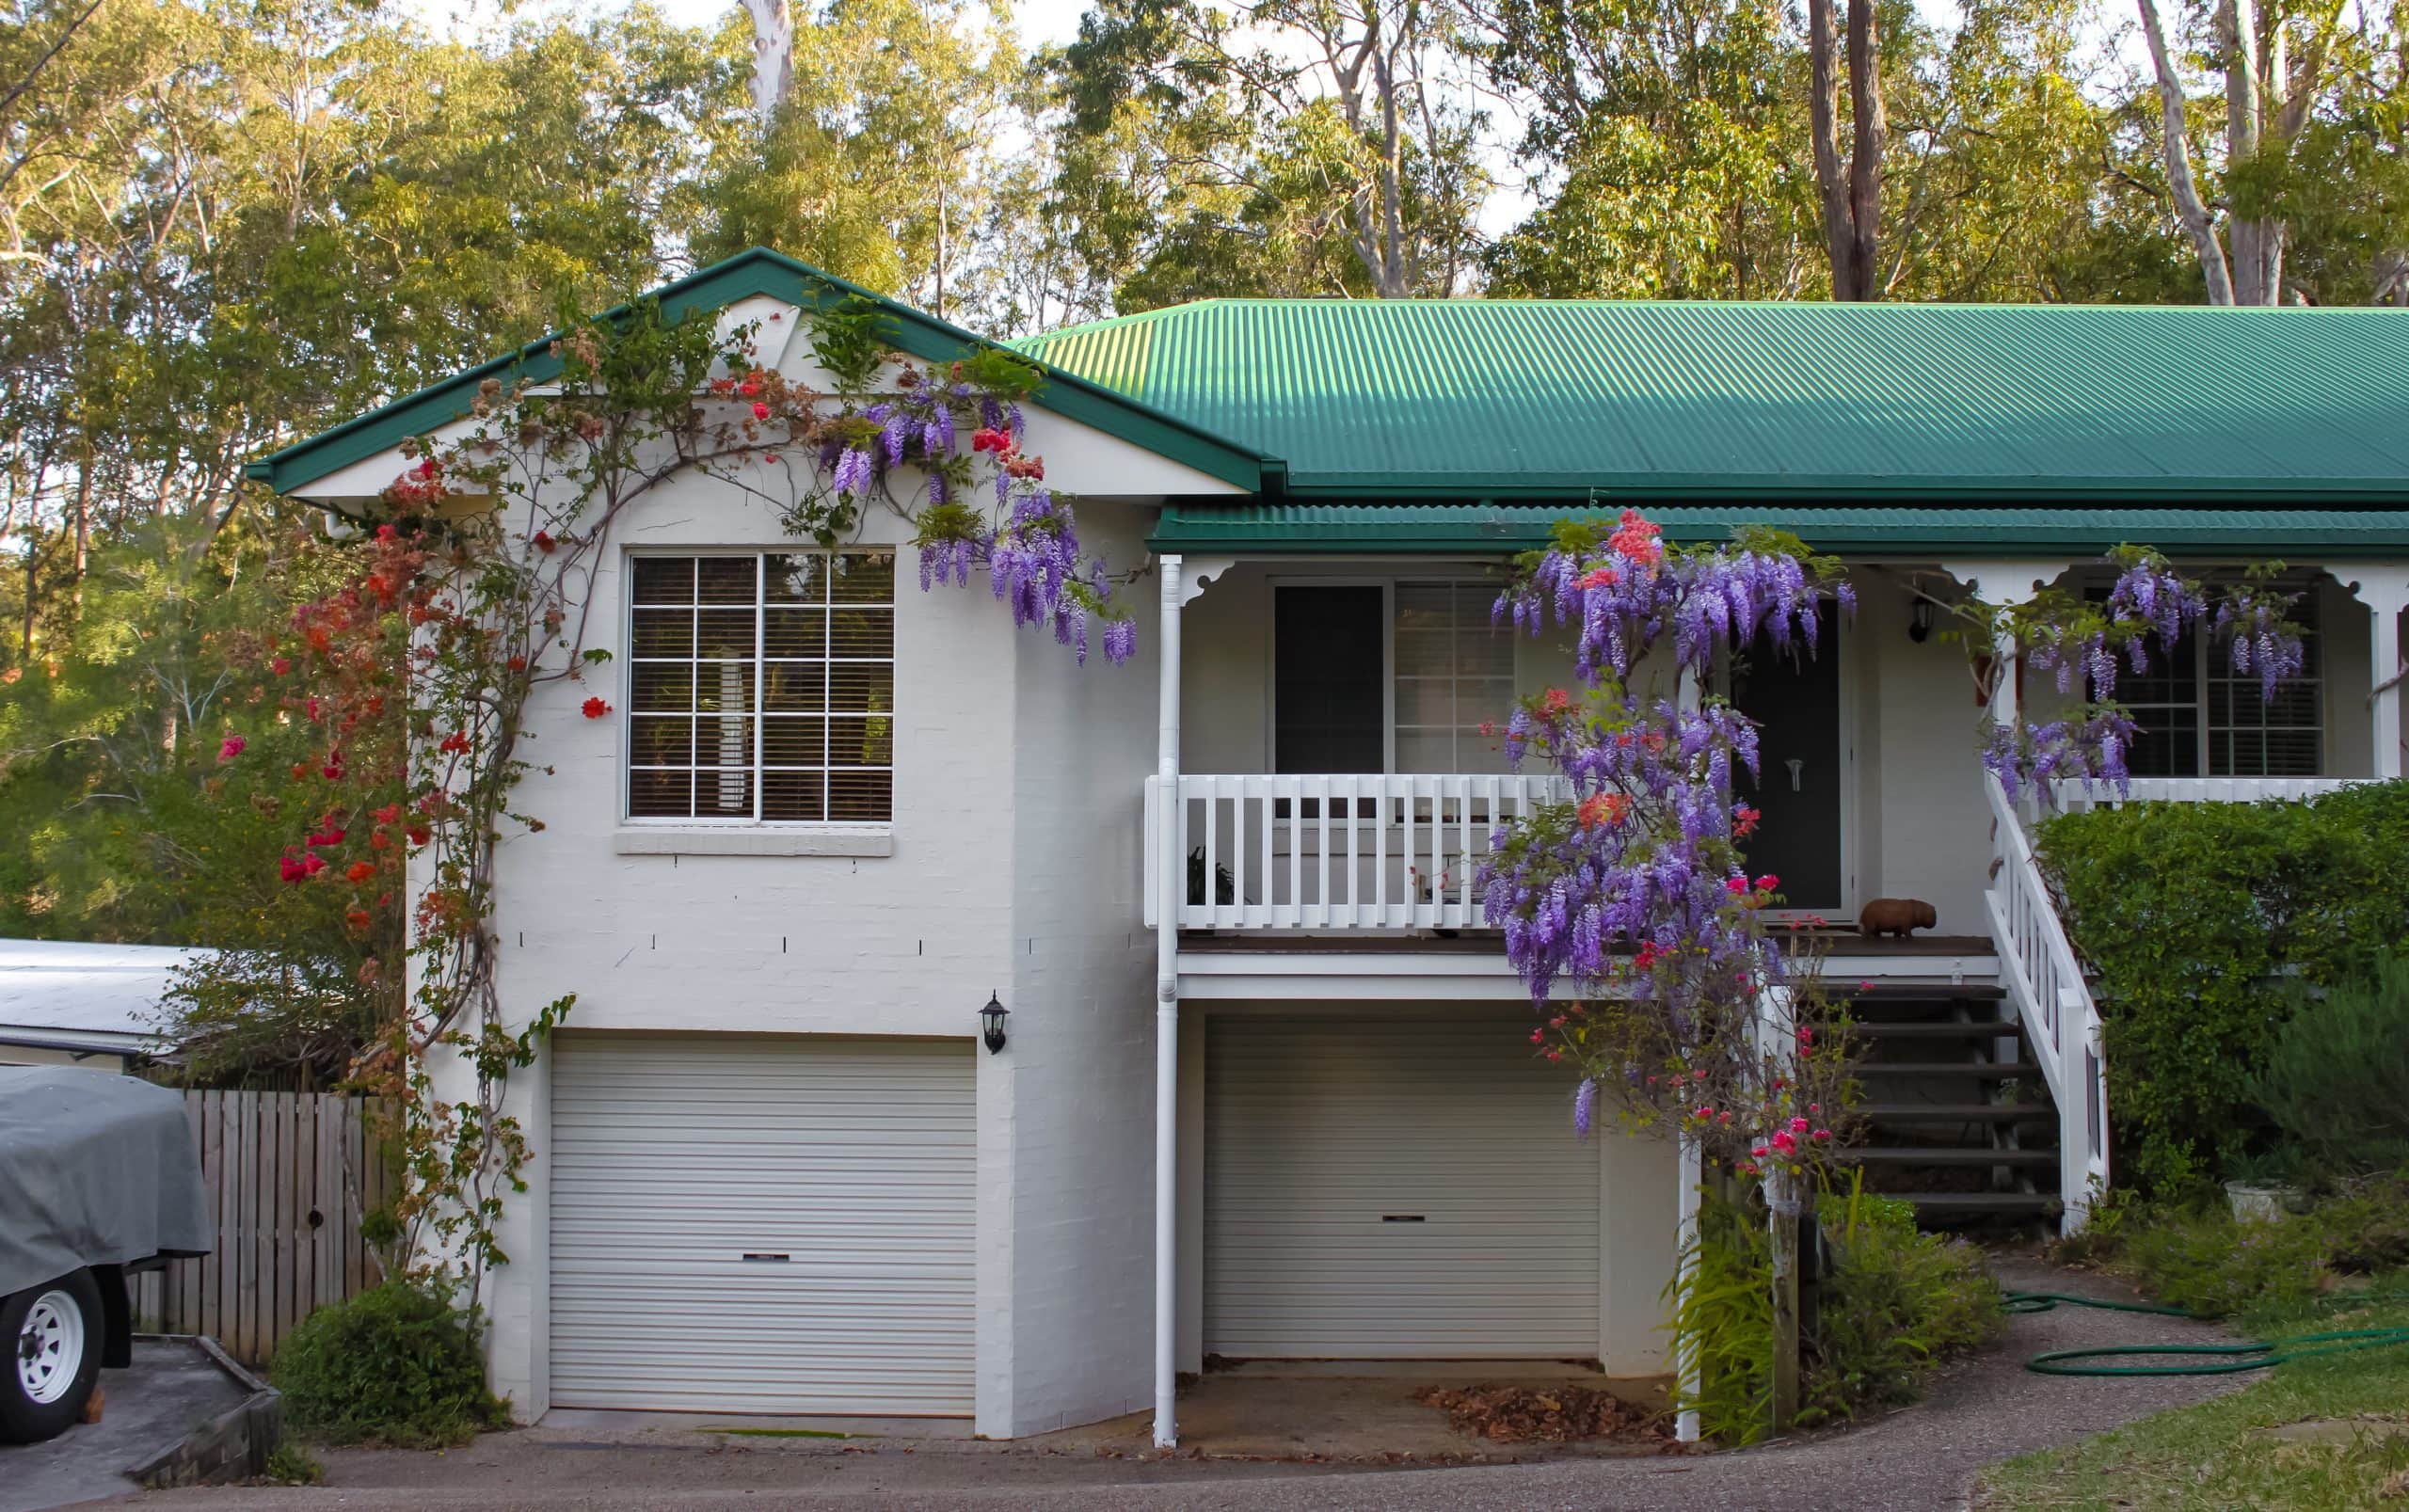 Turbulent times and property settlements. Accompanying picture: Suburban house near Brisbane Australia with wisteria growing over the stairs and porch and tall gum trees behind